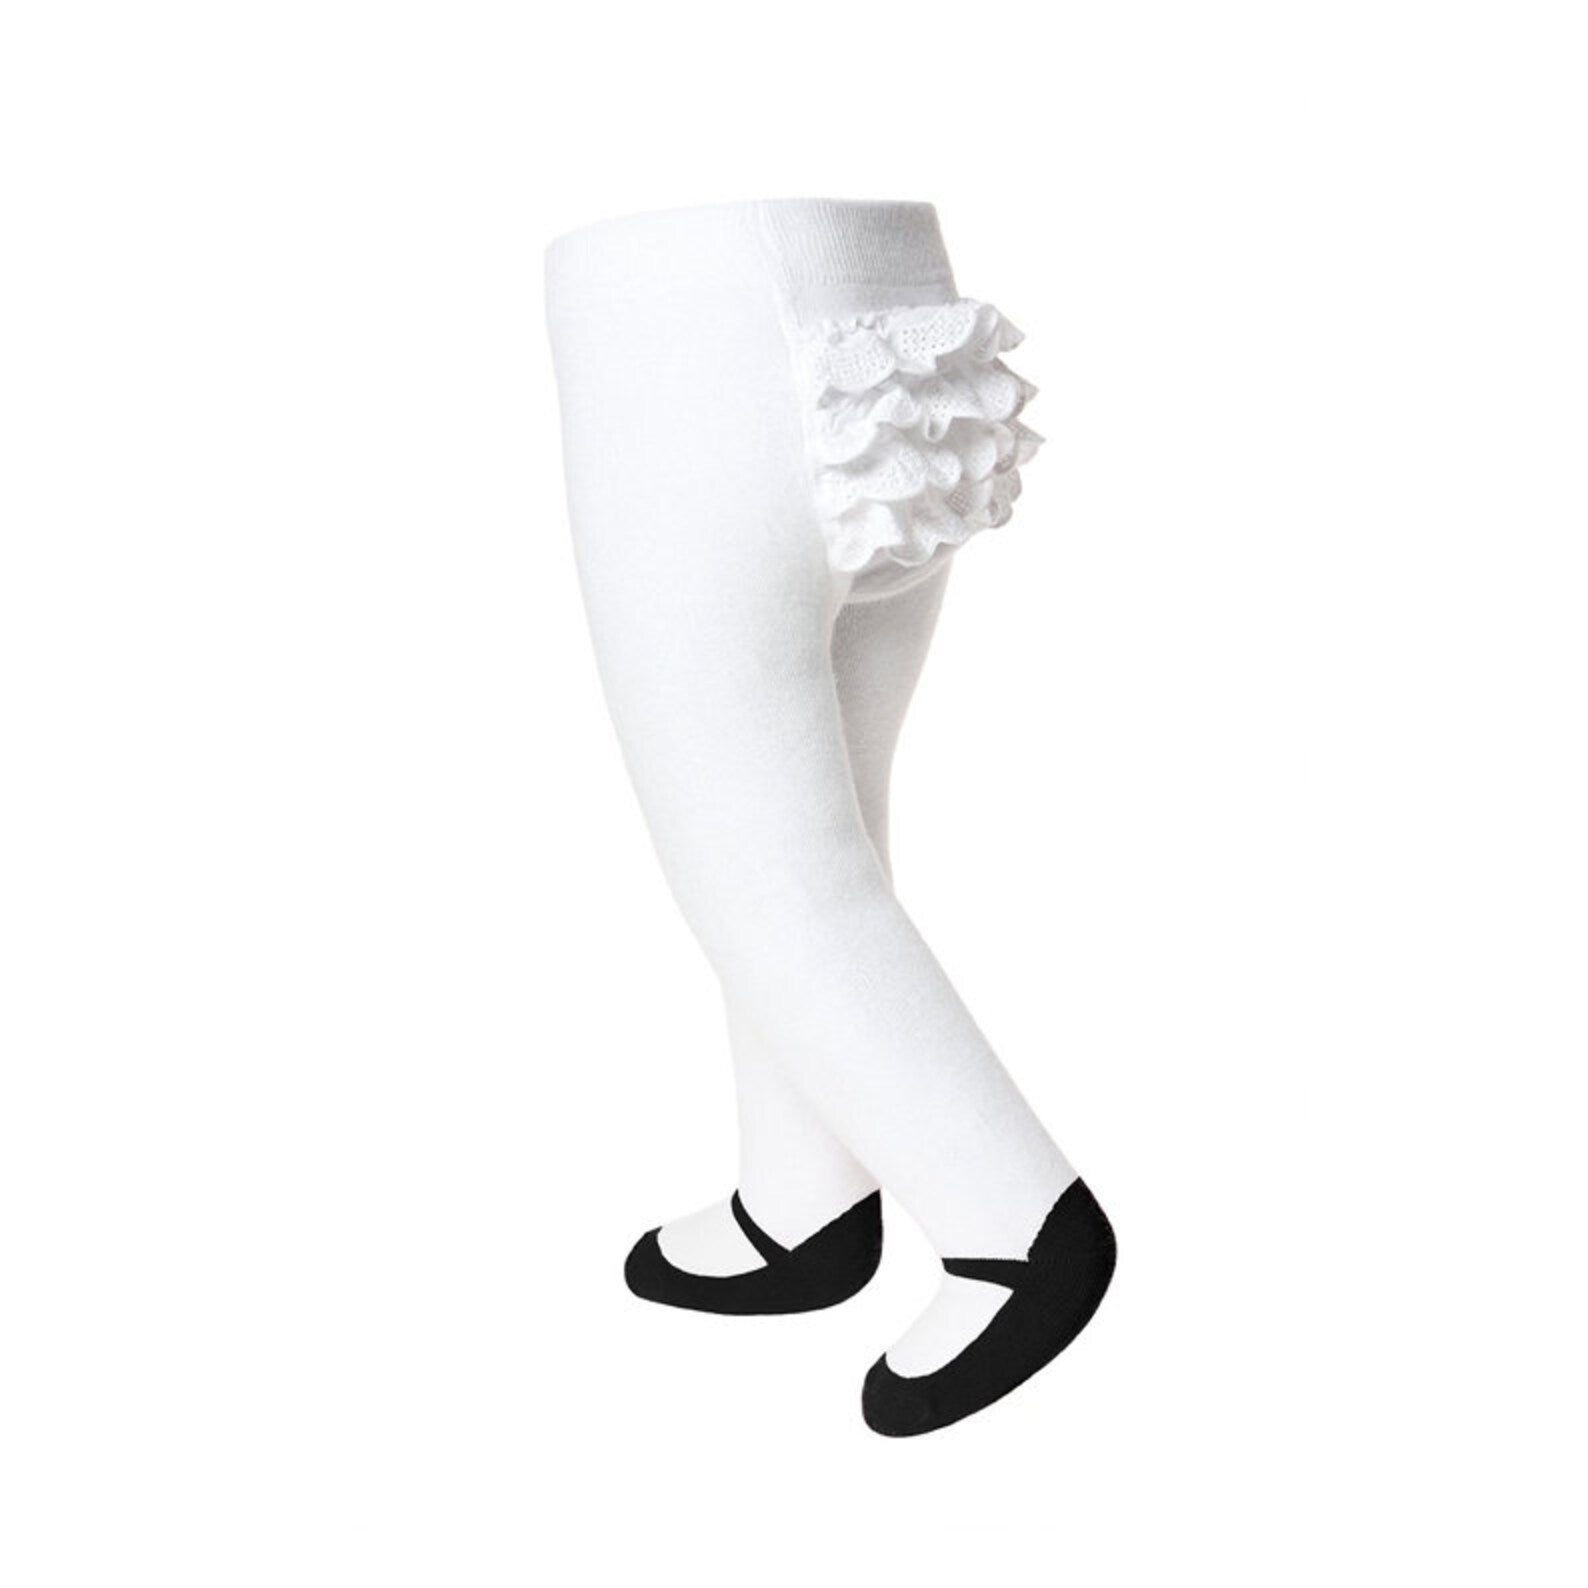  Baby Emporio infant girl ruffle tights for ages 6-12 months, featuring a black shoe design and anti-slip soles with a comfort waist